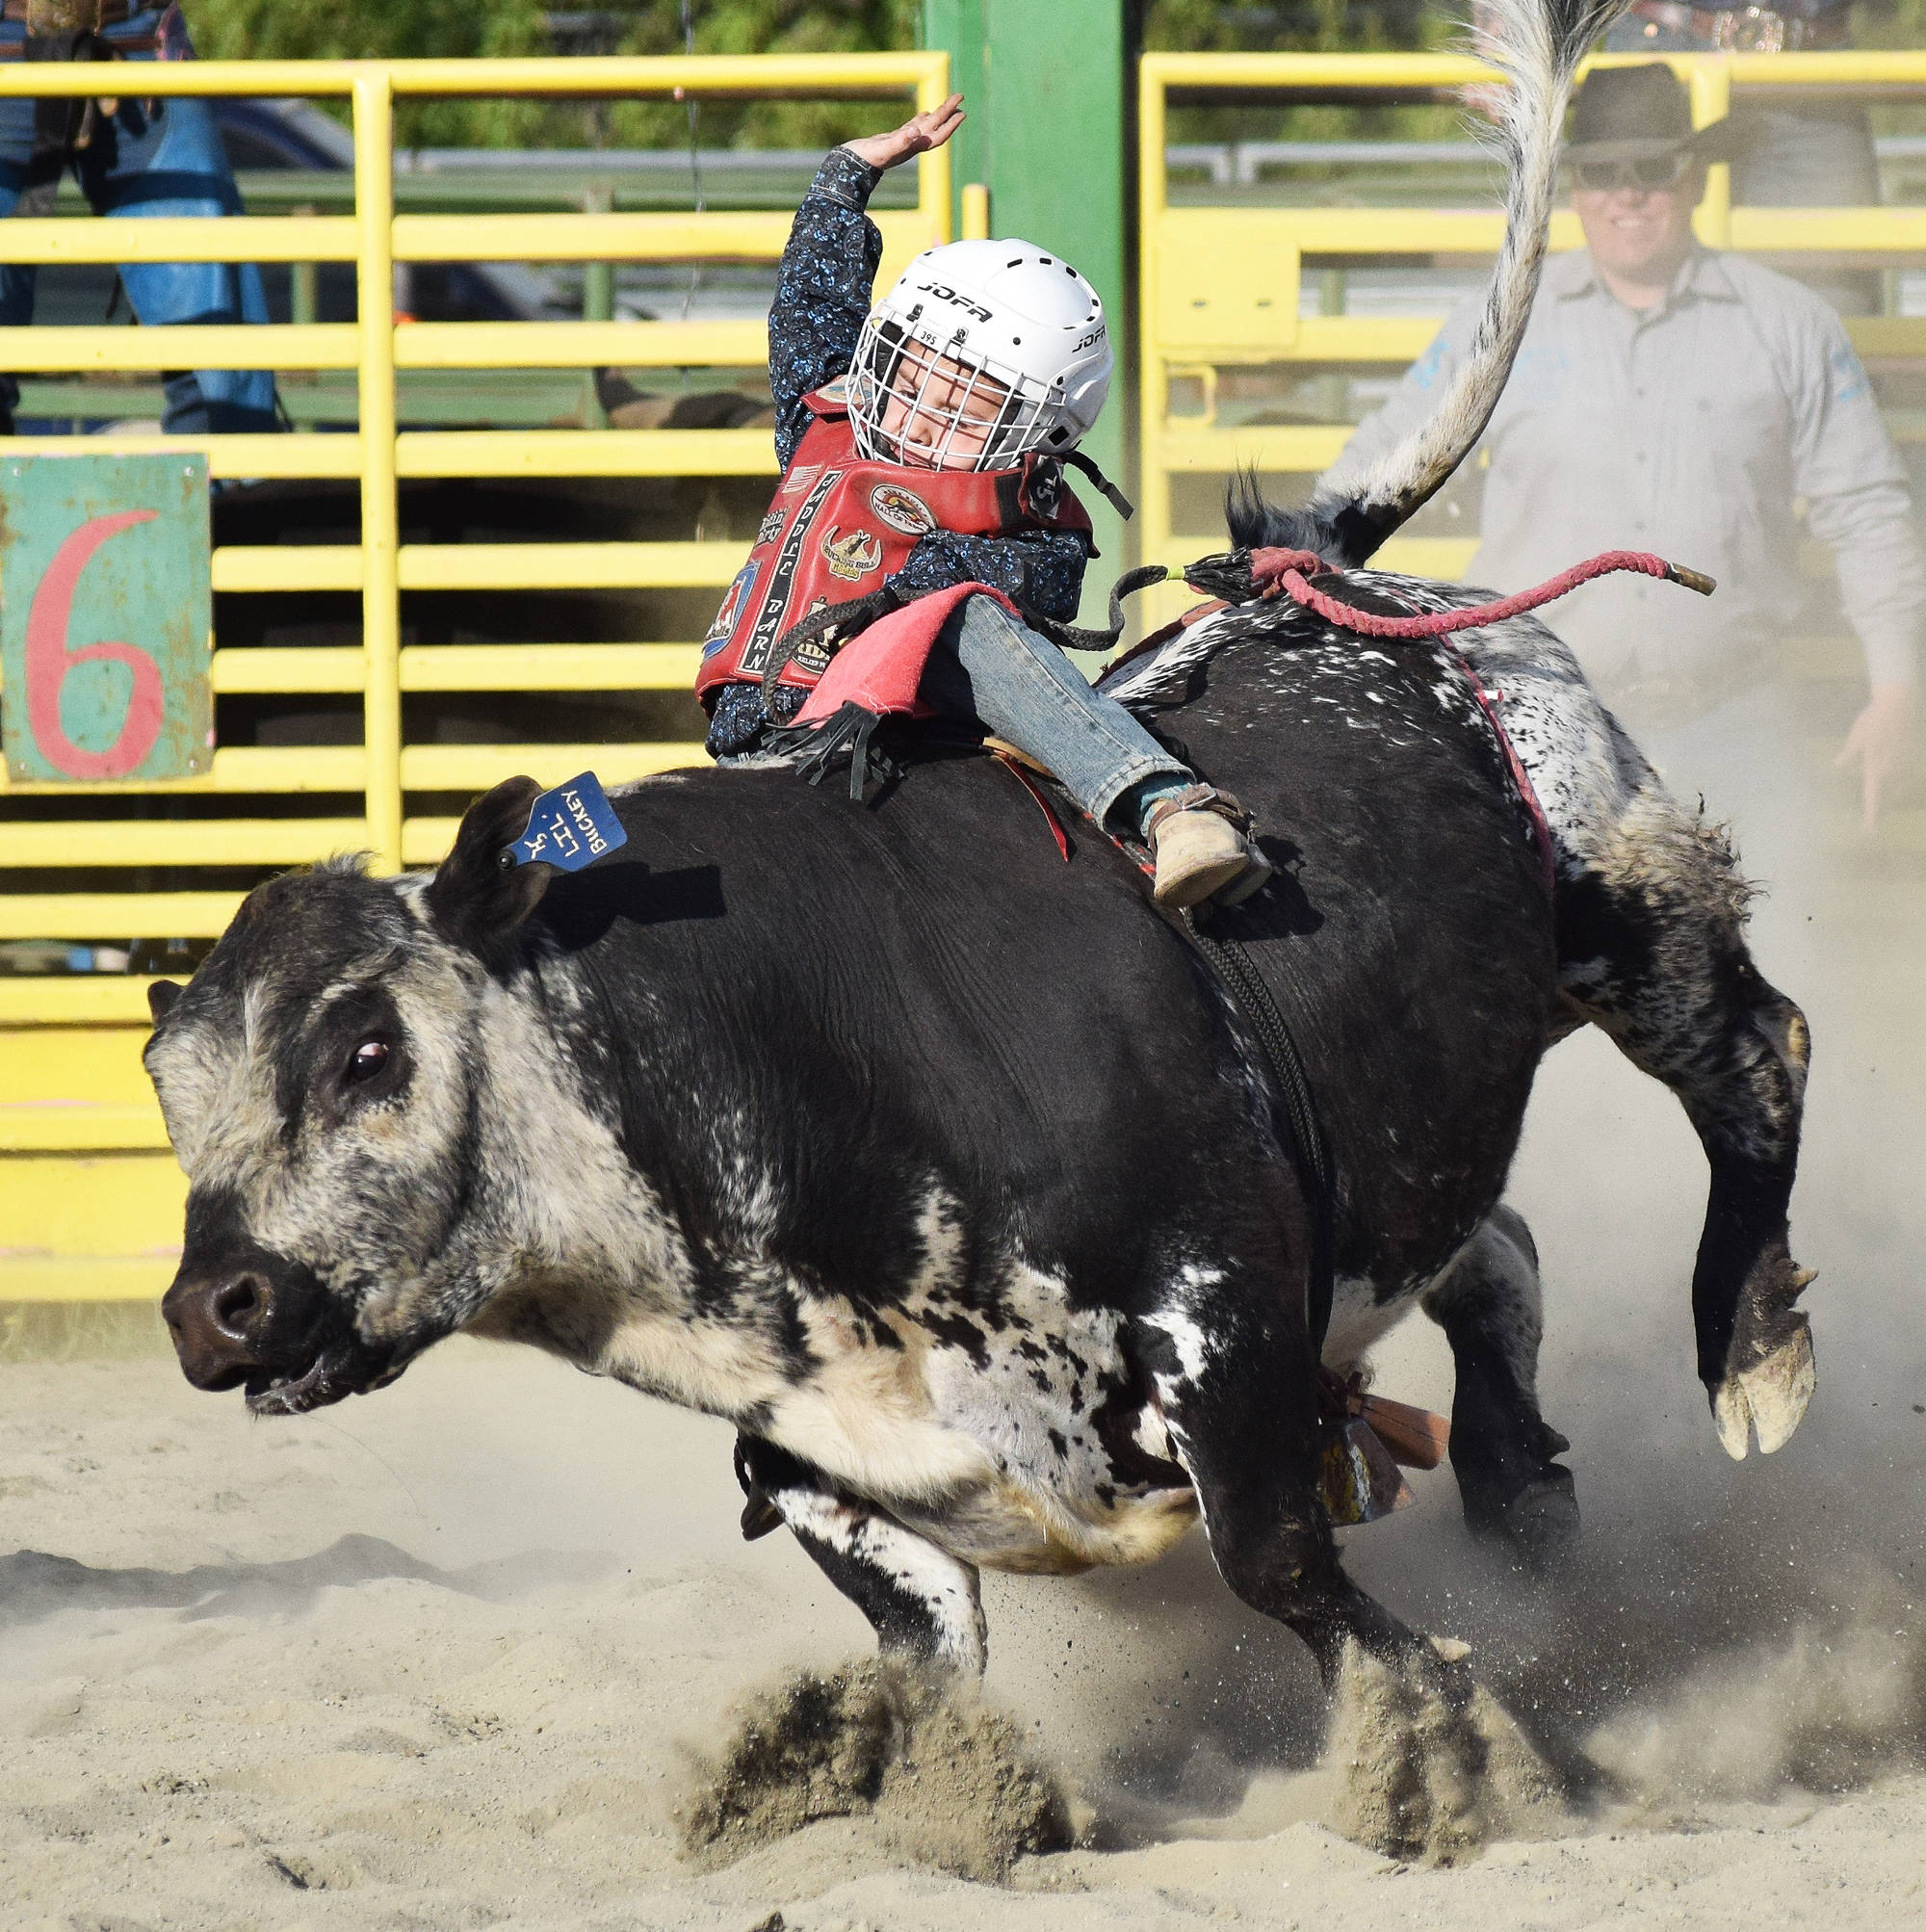 Thrills and spills at the Soldotna Rodeo